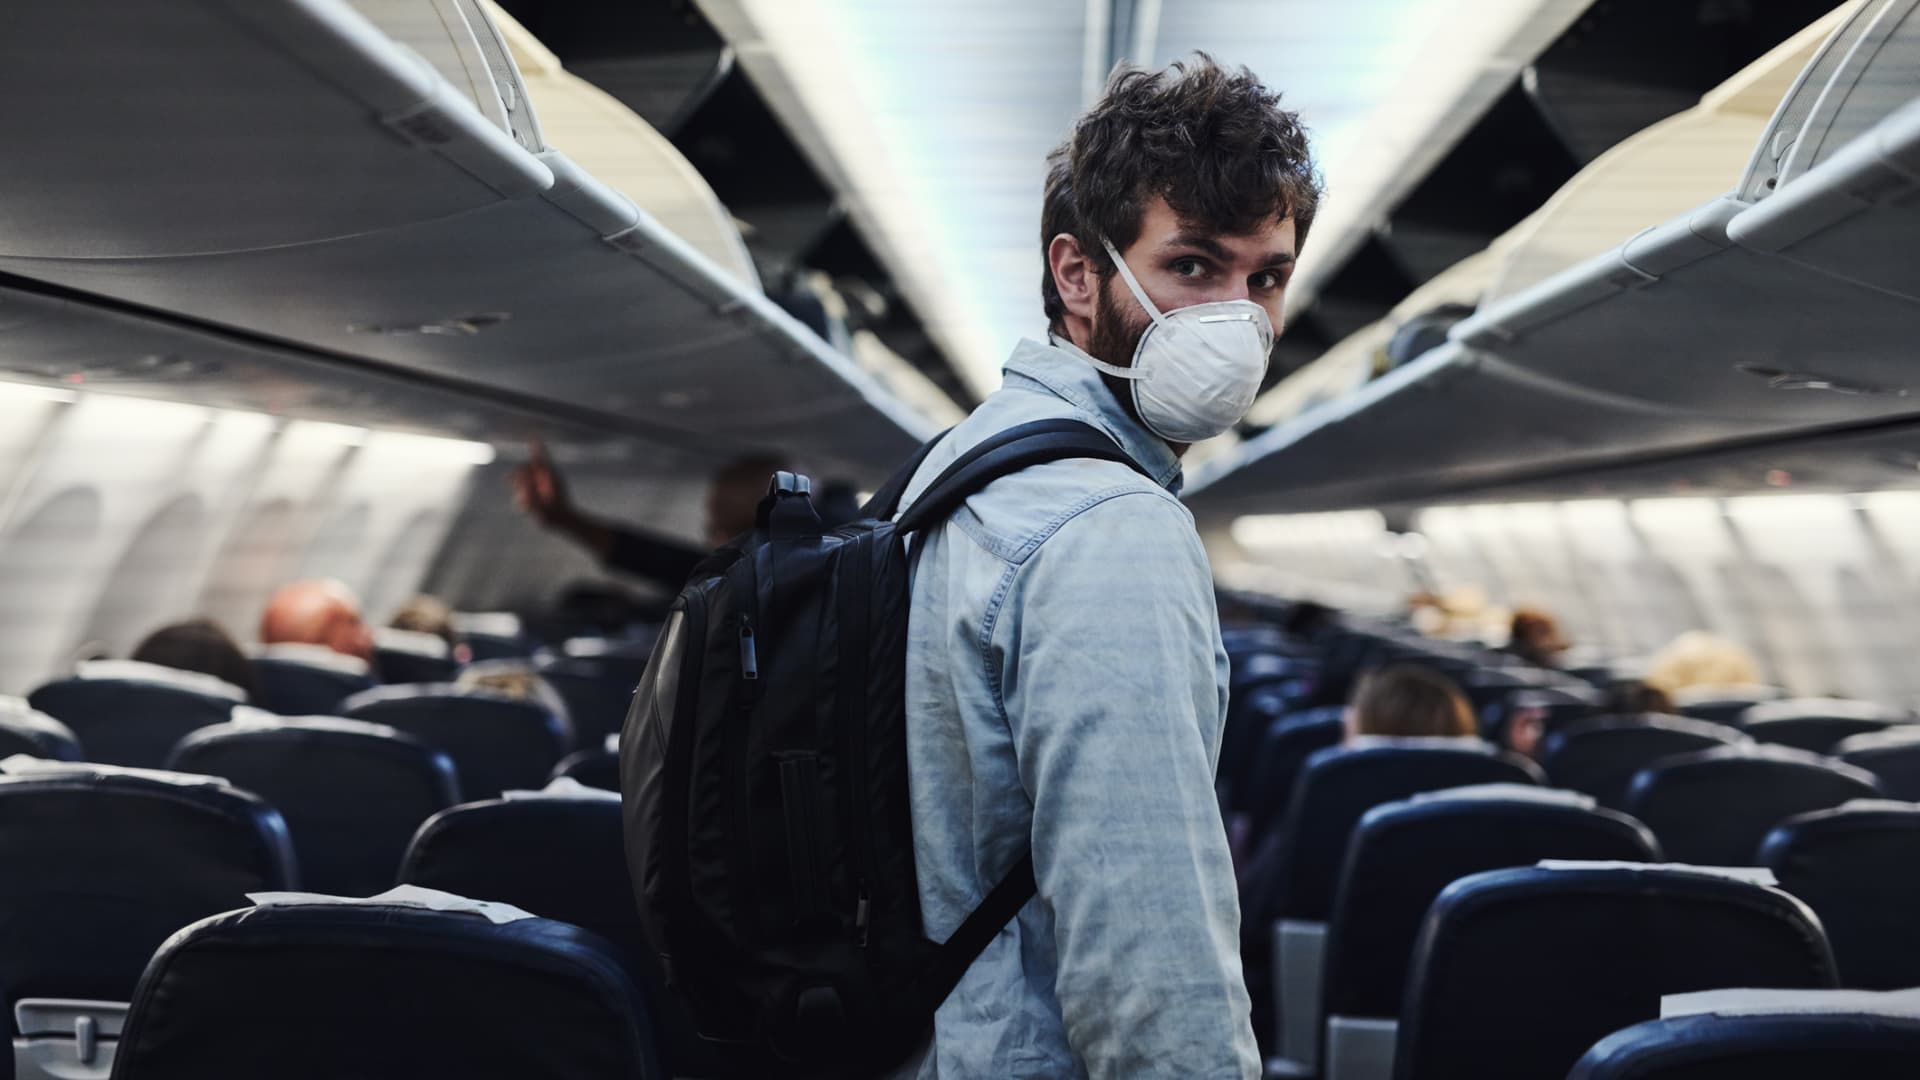 The Nationwide Travel Mask Mandate Has Ended ... For Now - cover